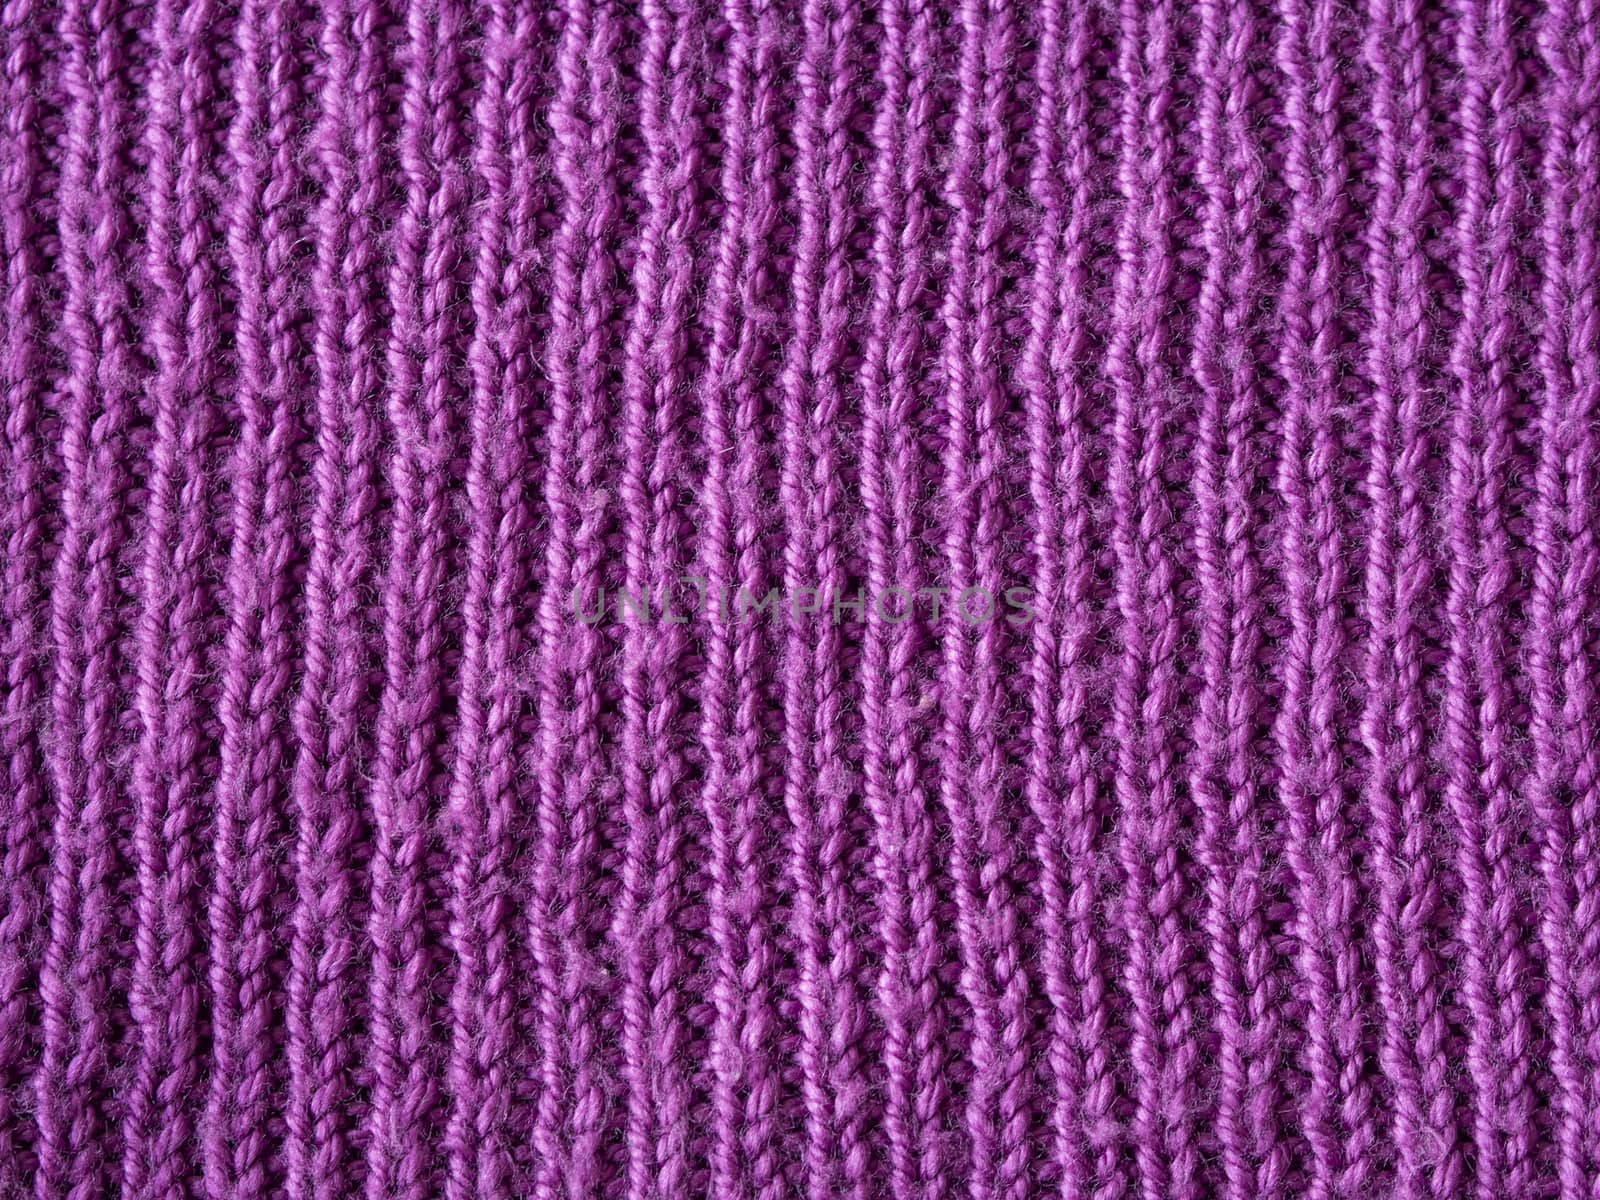 bright pink lilac wool hand knitted texture abstract background by Henkeova